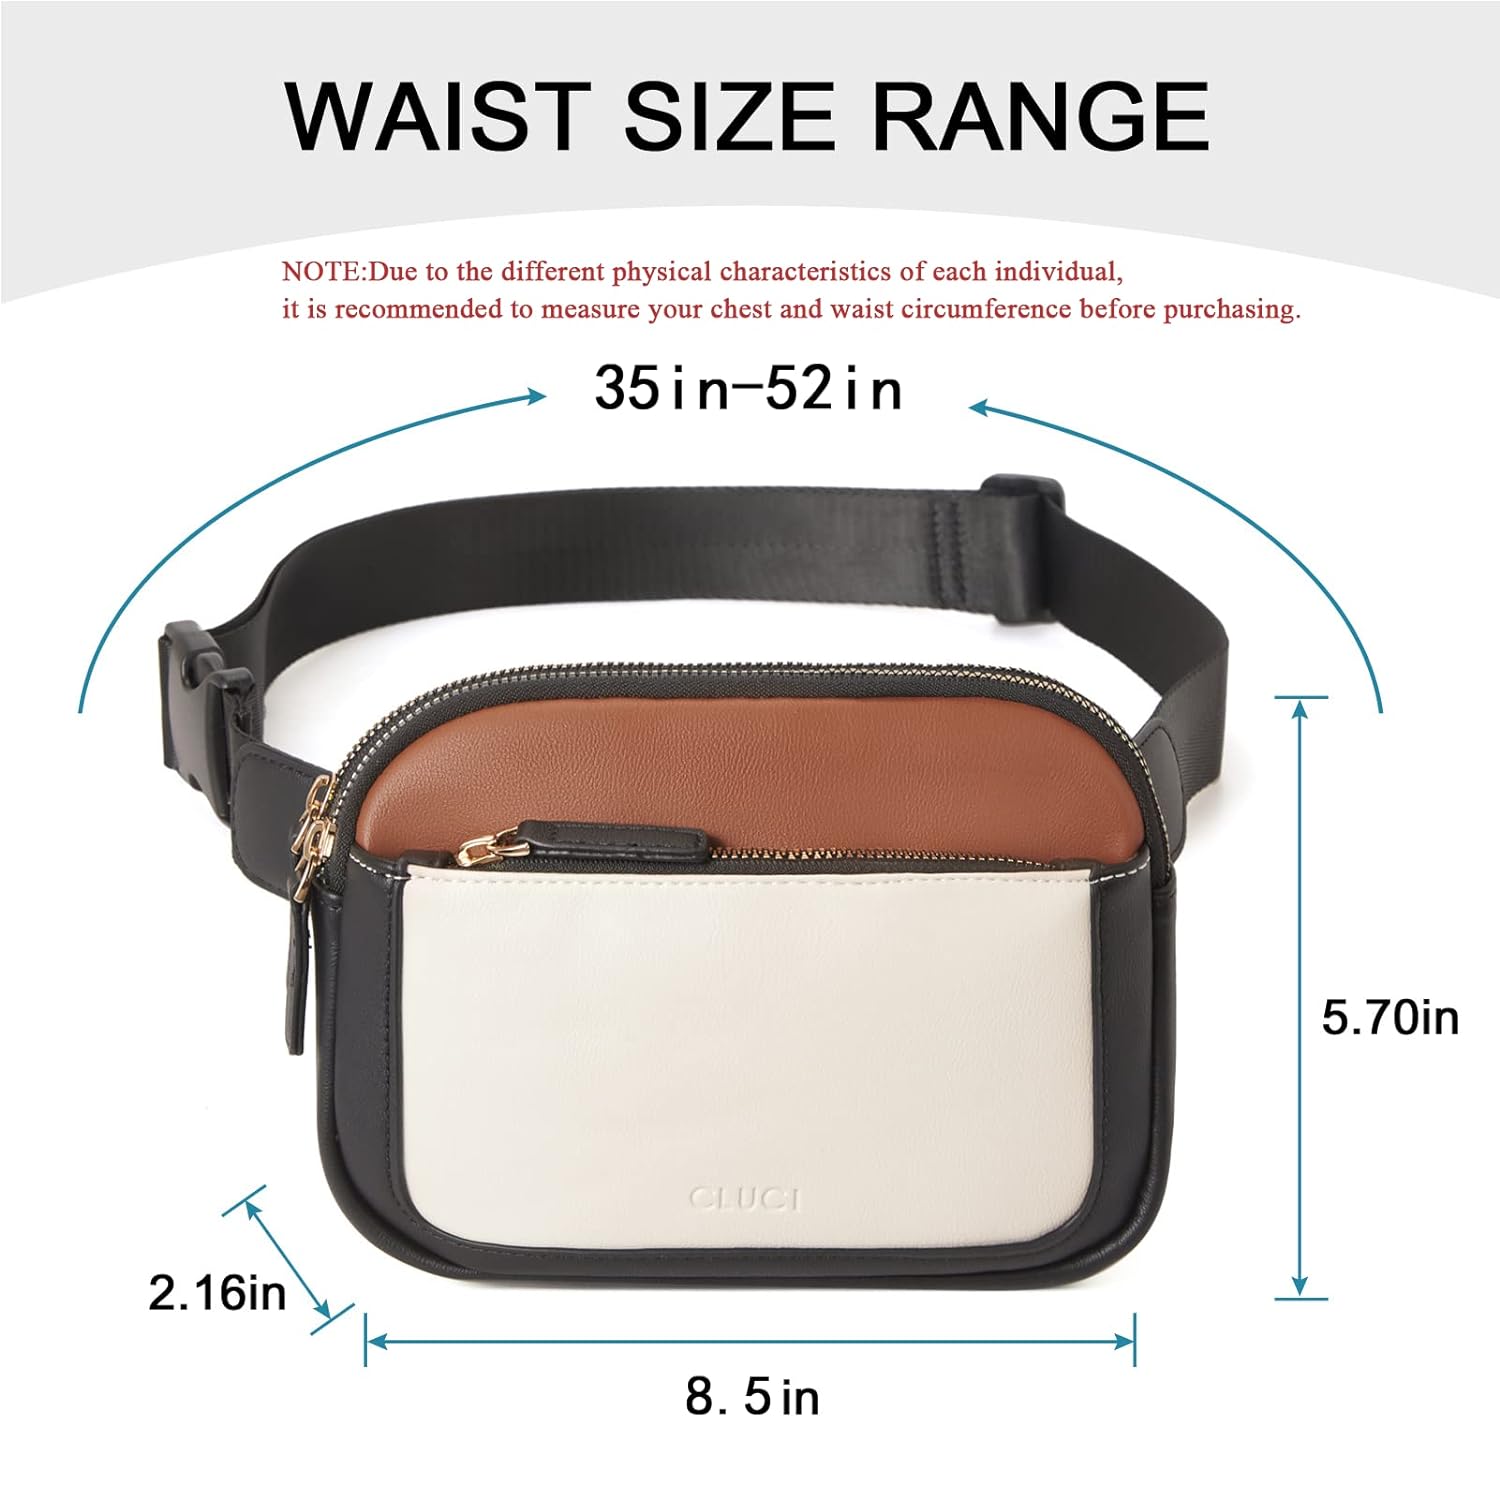 CLUCI Belt Bag for Women, Mini Everywhere Crossbody Waist Bag Adjustable Strap, Vegan Leather Women's Fanny Pack, Black and Brown with off-white, One Size